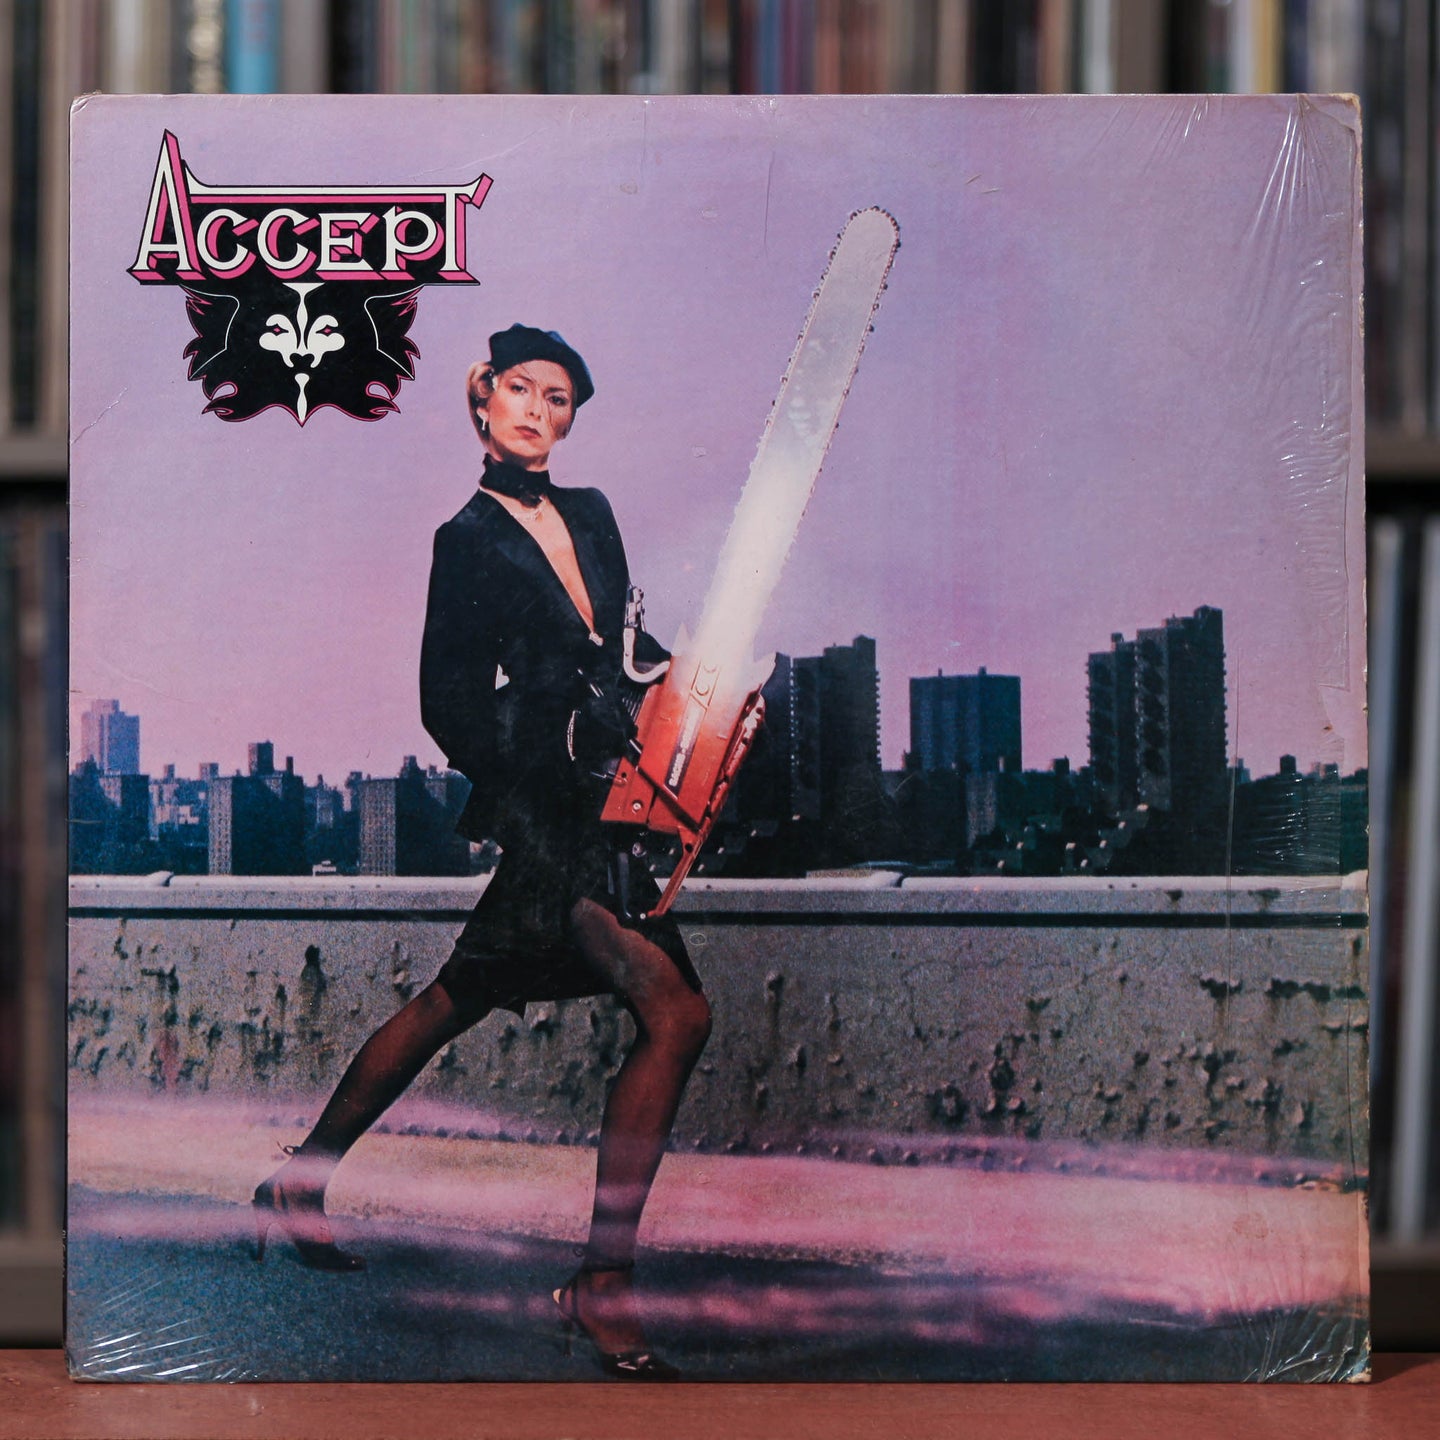 Accept - Self-TItled - 1984 PVC Records, VG/VG w/Shrink